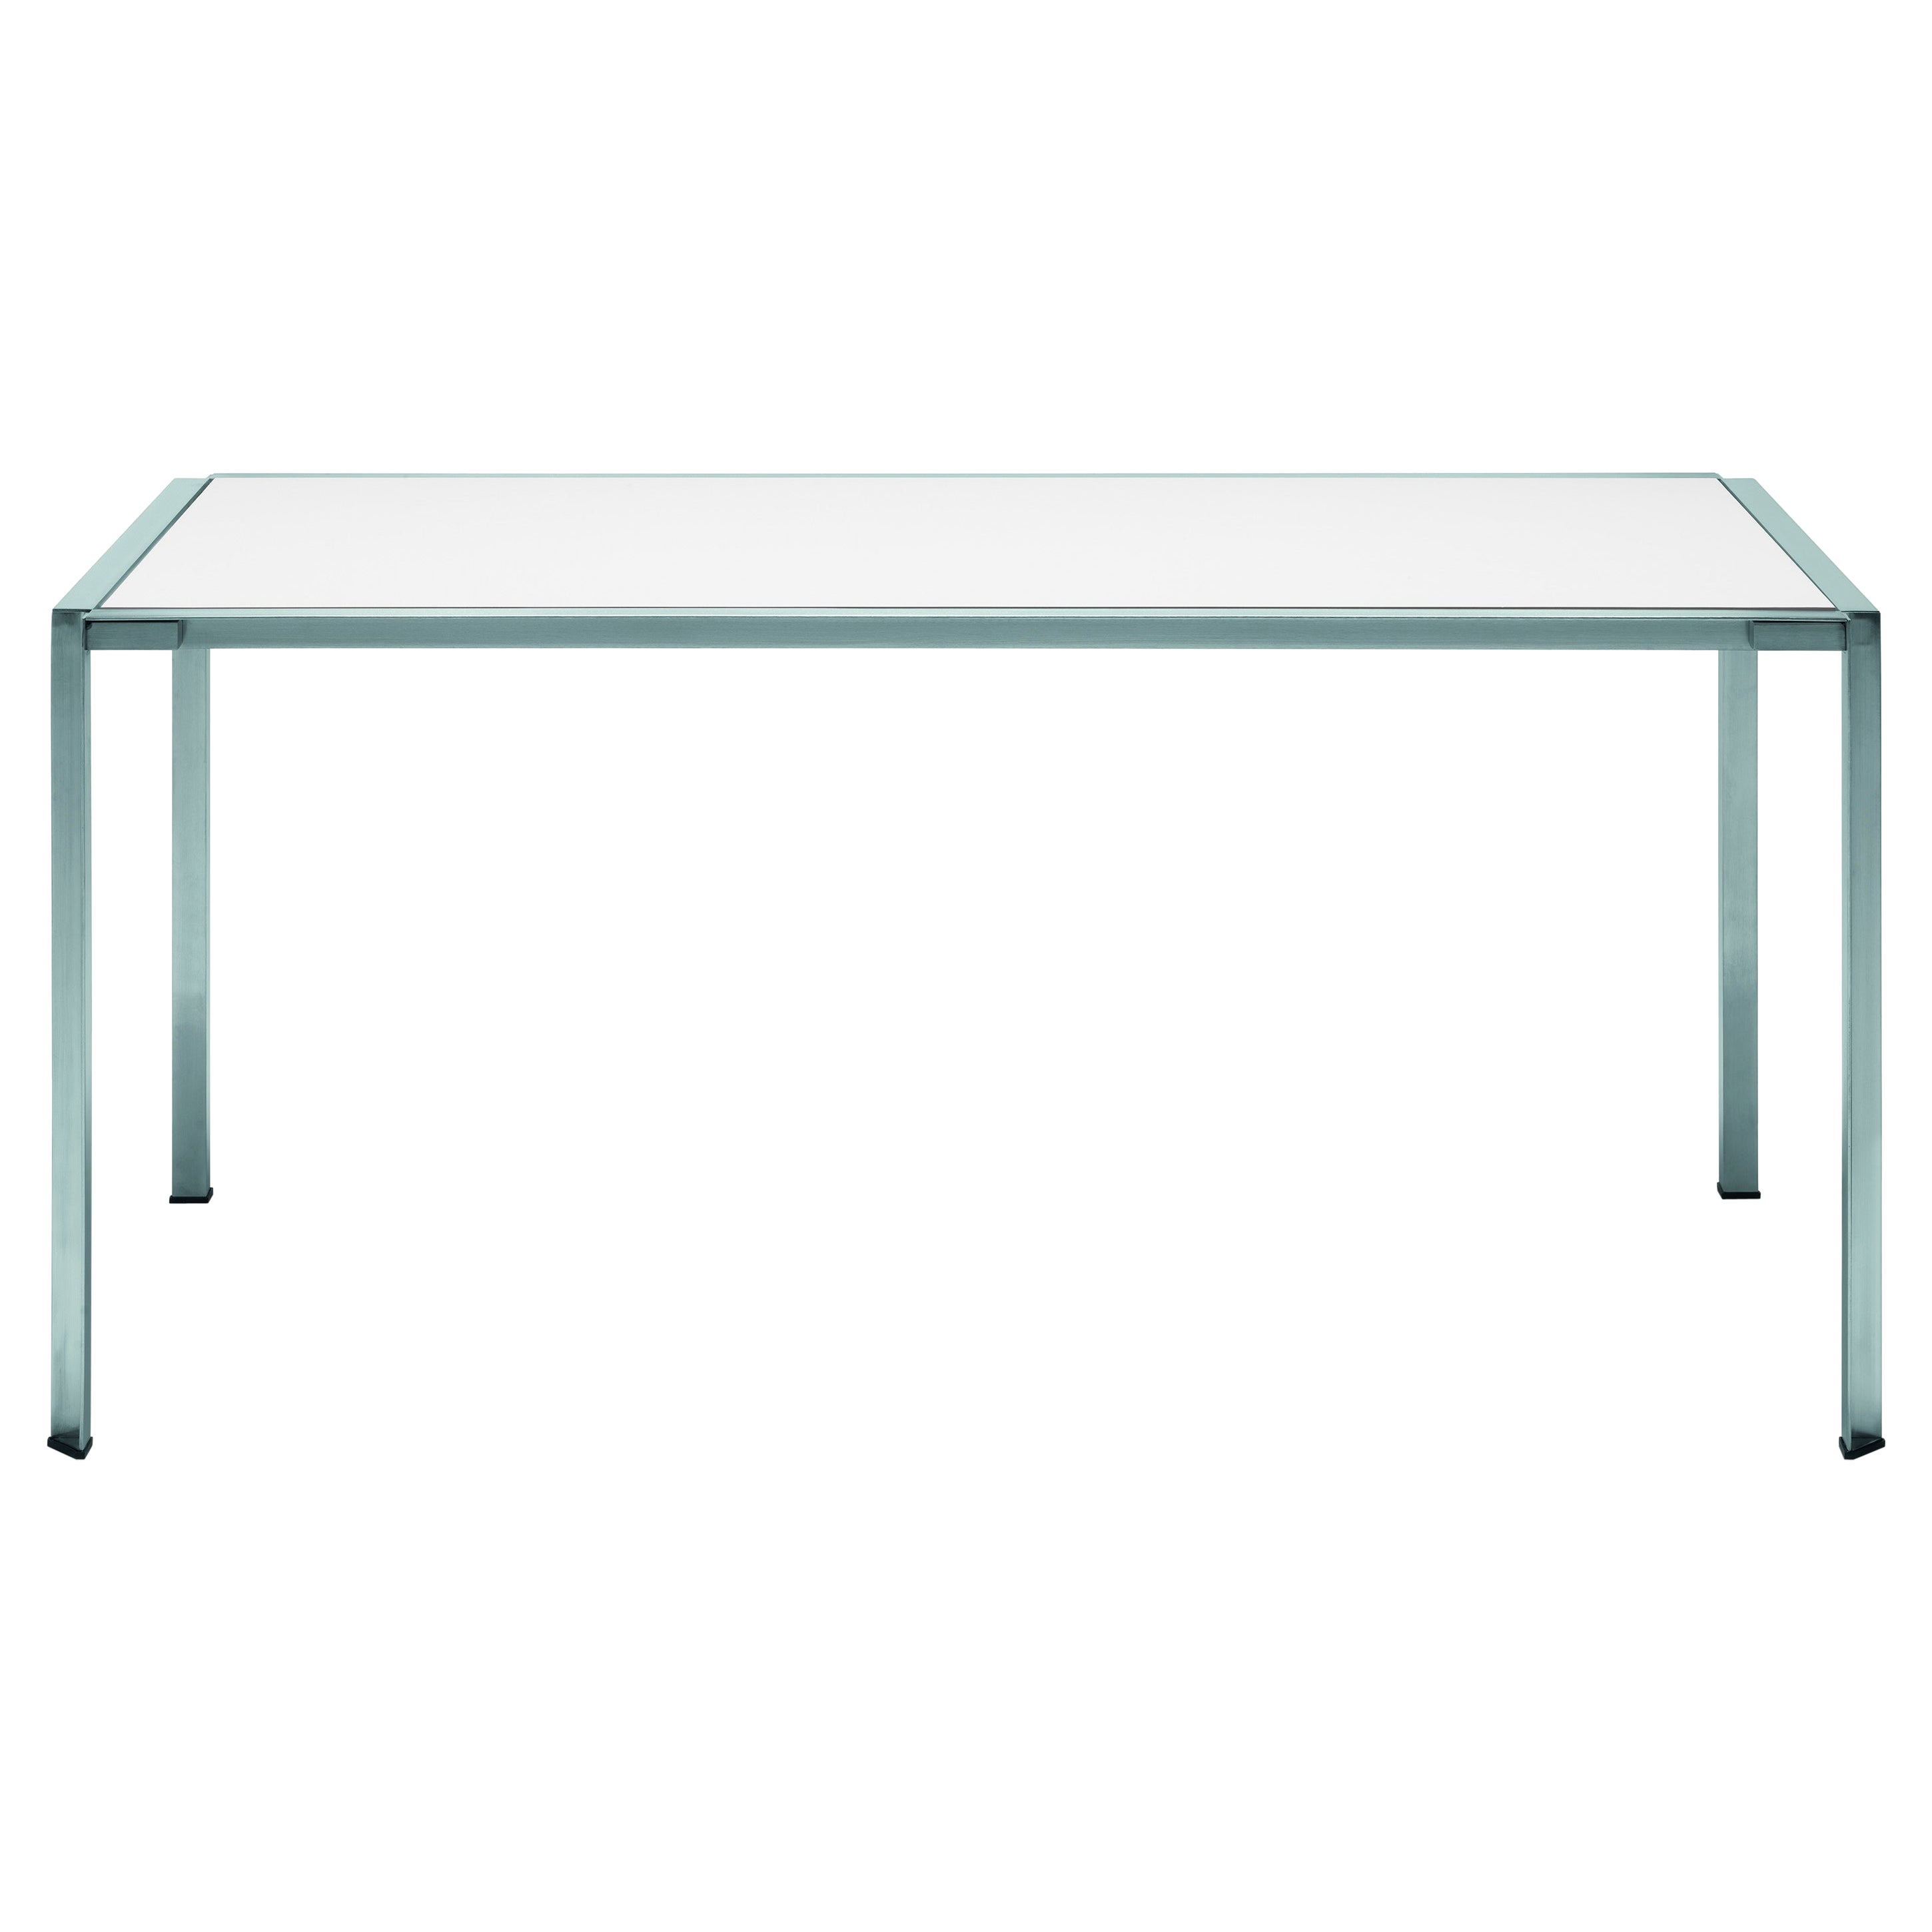 Alias 222_O Green Table with Brushed Stainless Steel Frame and Dekton Top 